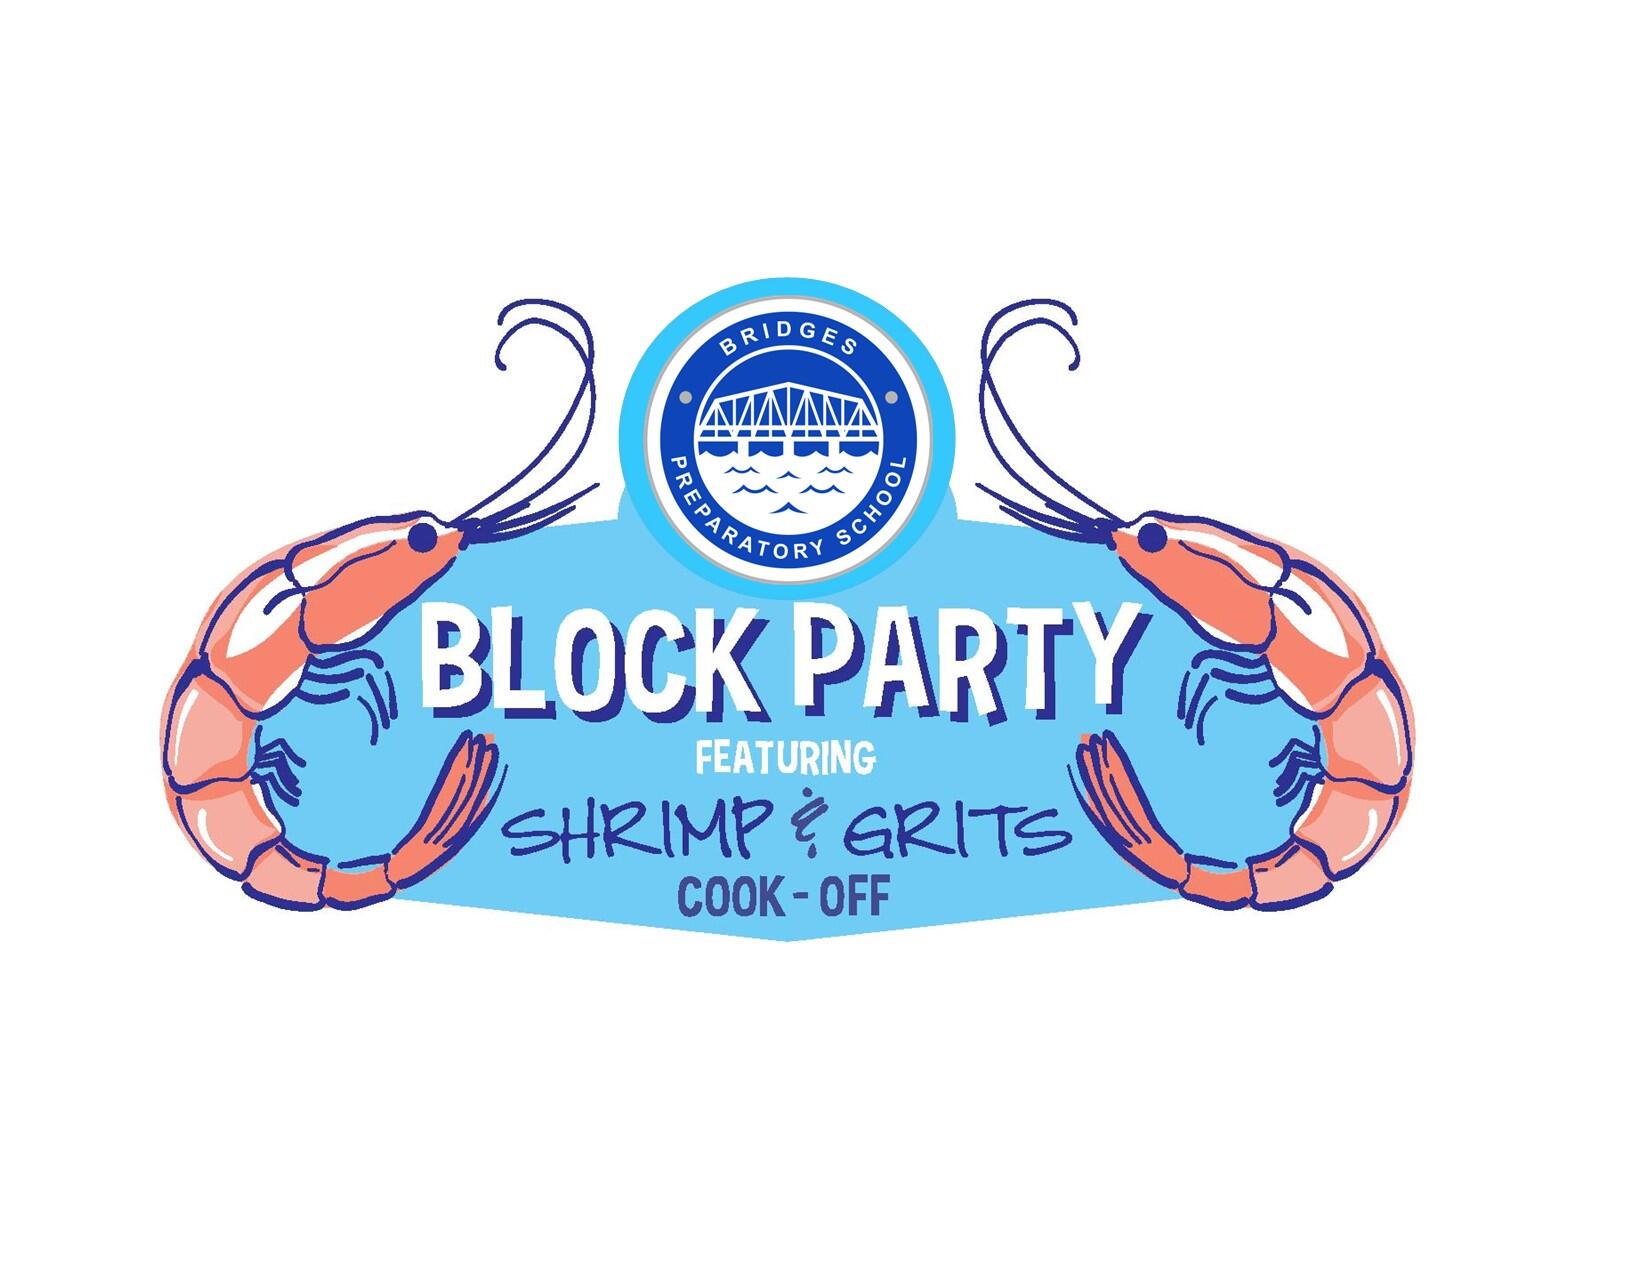 Block Party, featuring Shrimp & Grits cook-off